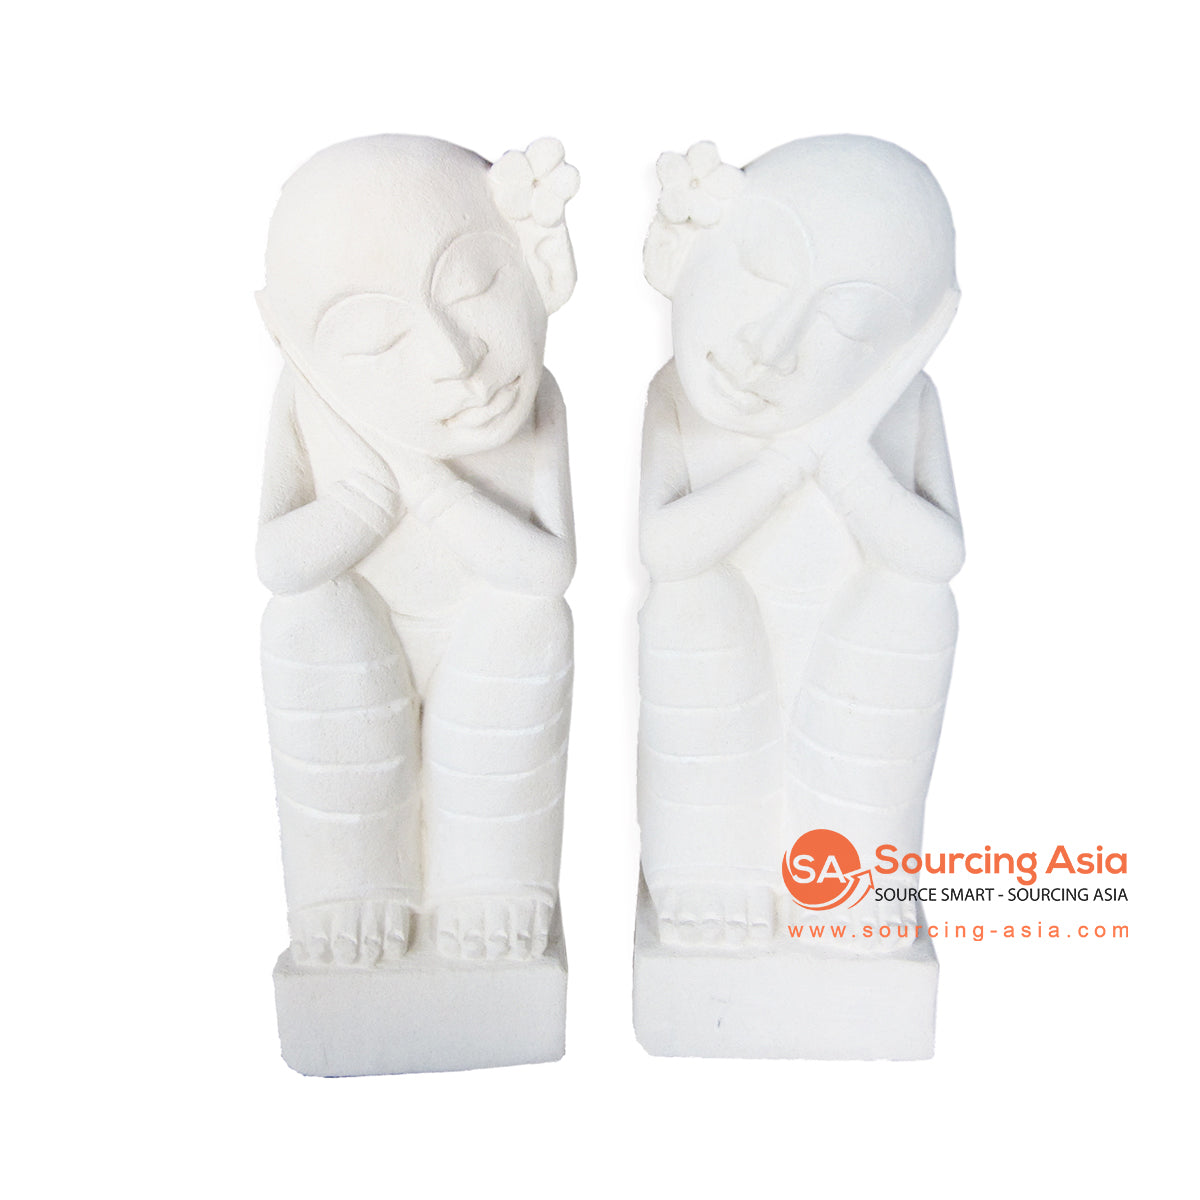 MHB049-30 SET OF TWO STONE DREAMING BALD FIGURE STATUES